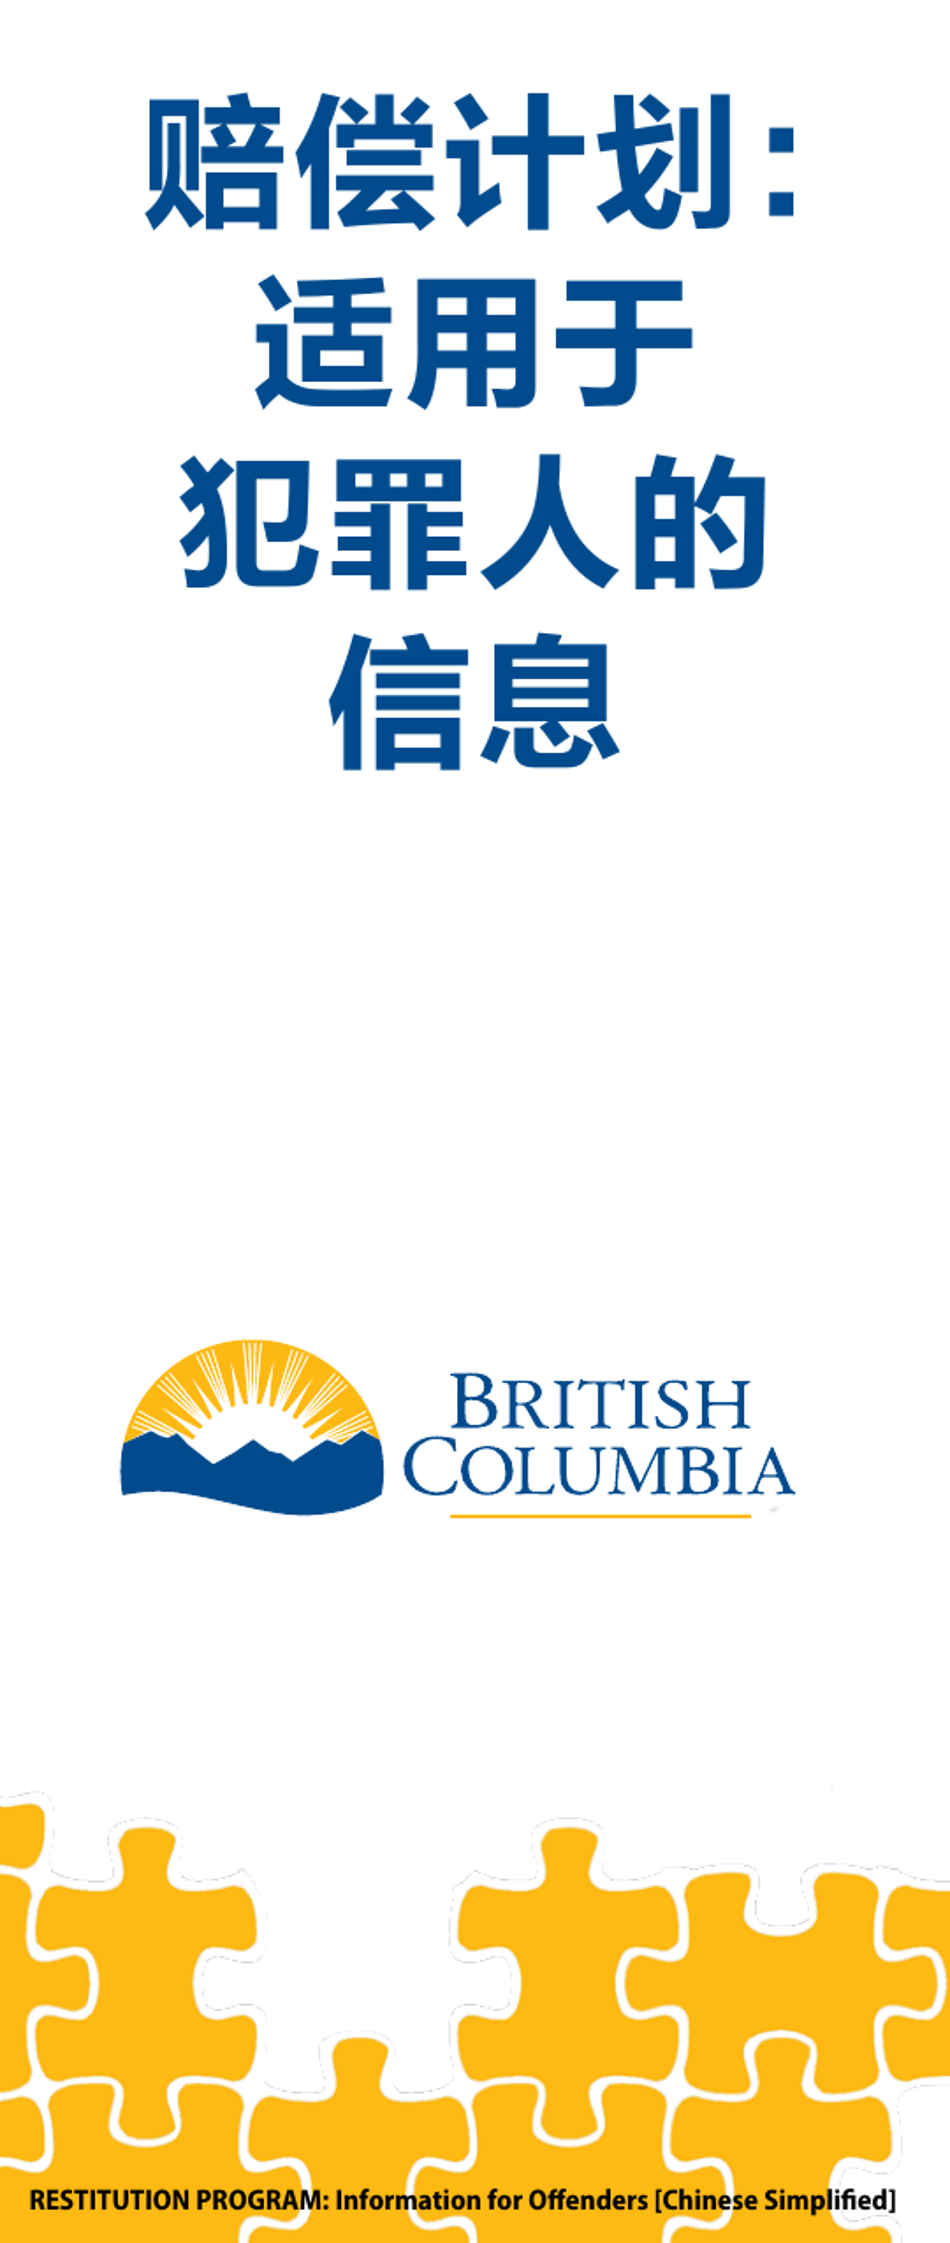 Restitution Program Application Form for Offenders - British Columbia, Canada (English / Chinese Simplified), Page 1